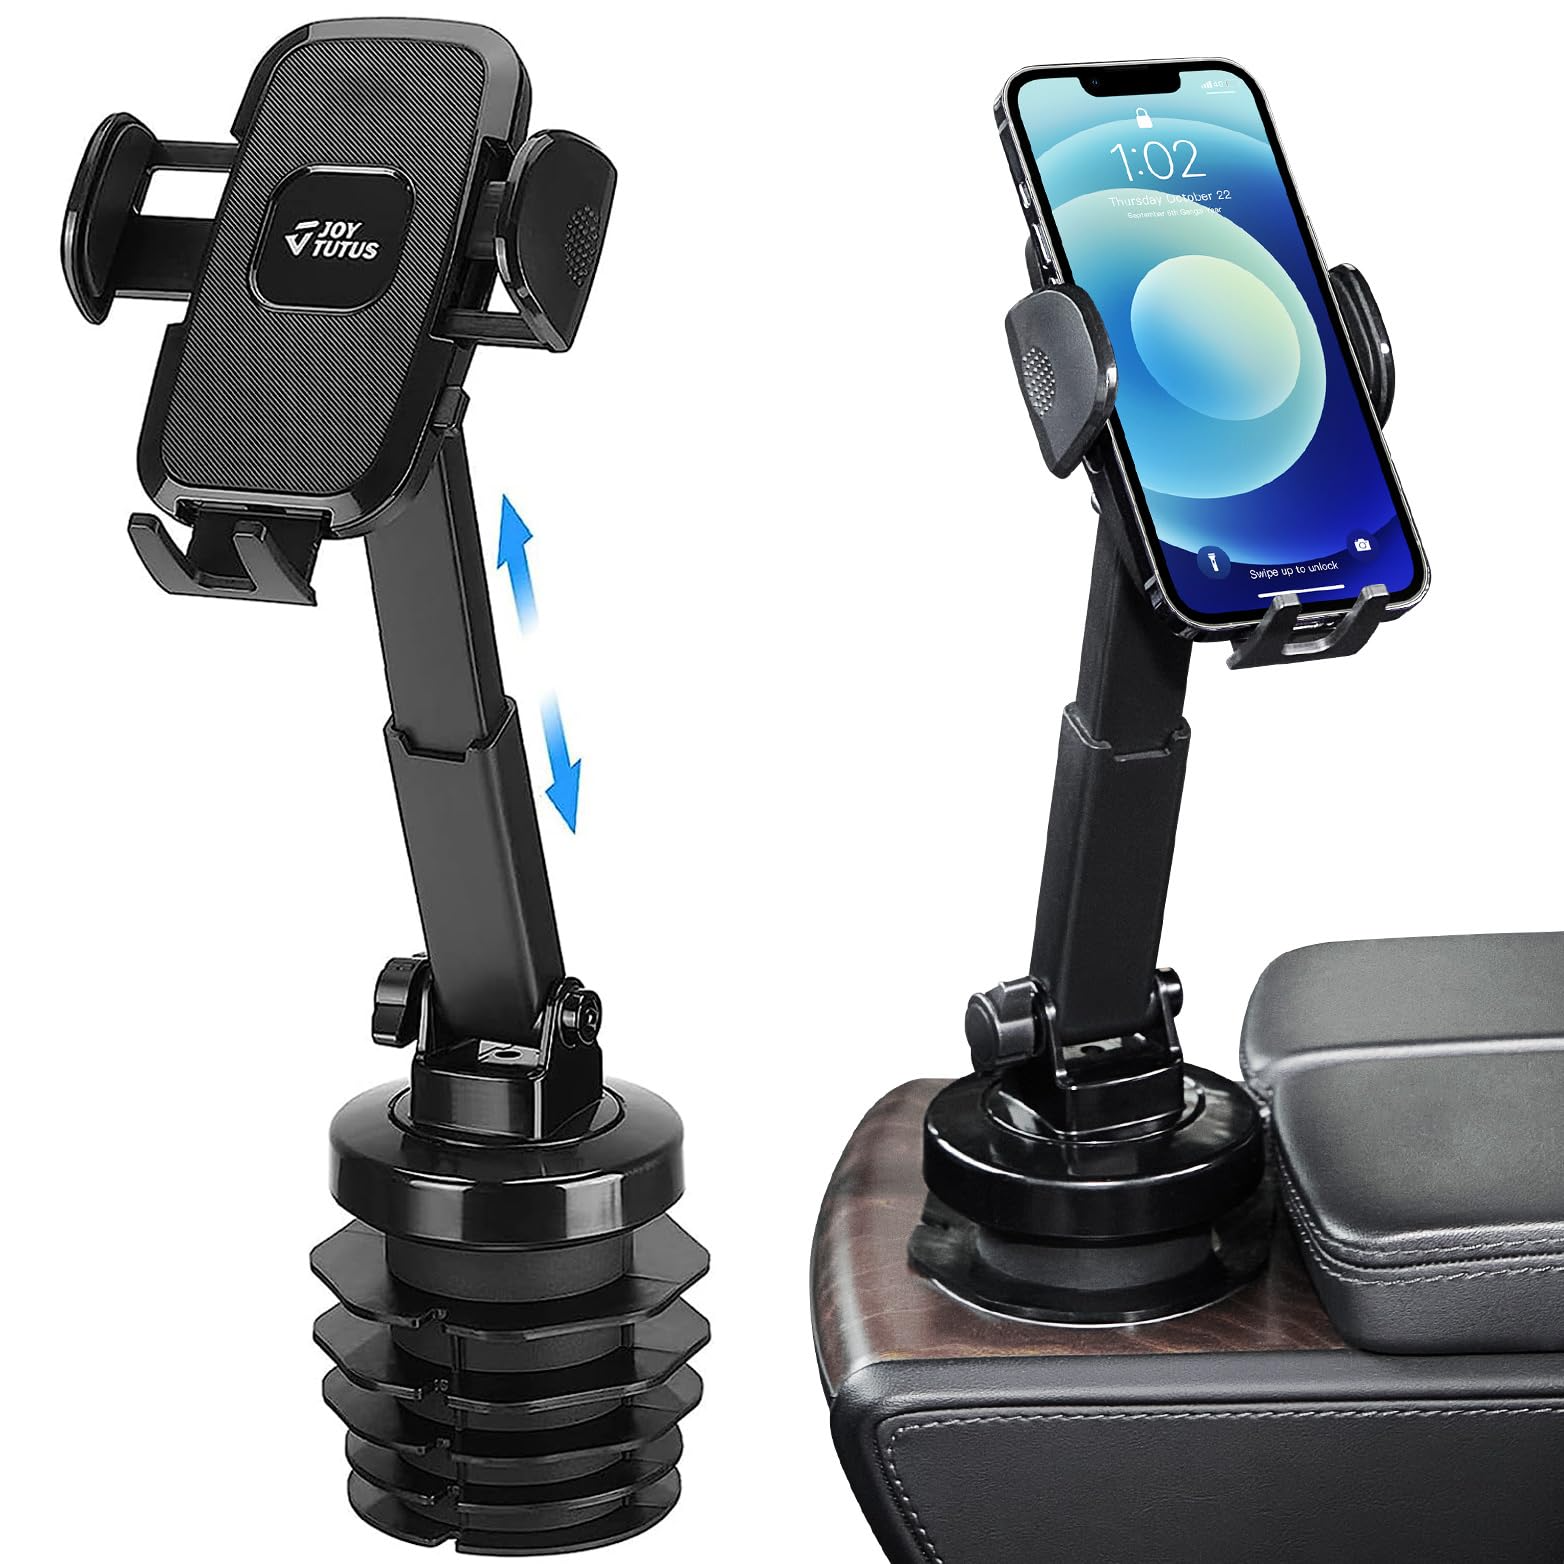 Car Cup Holder Phone Mount,Universal Adjustable for iPhone, Samsung, L